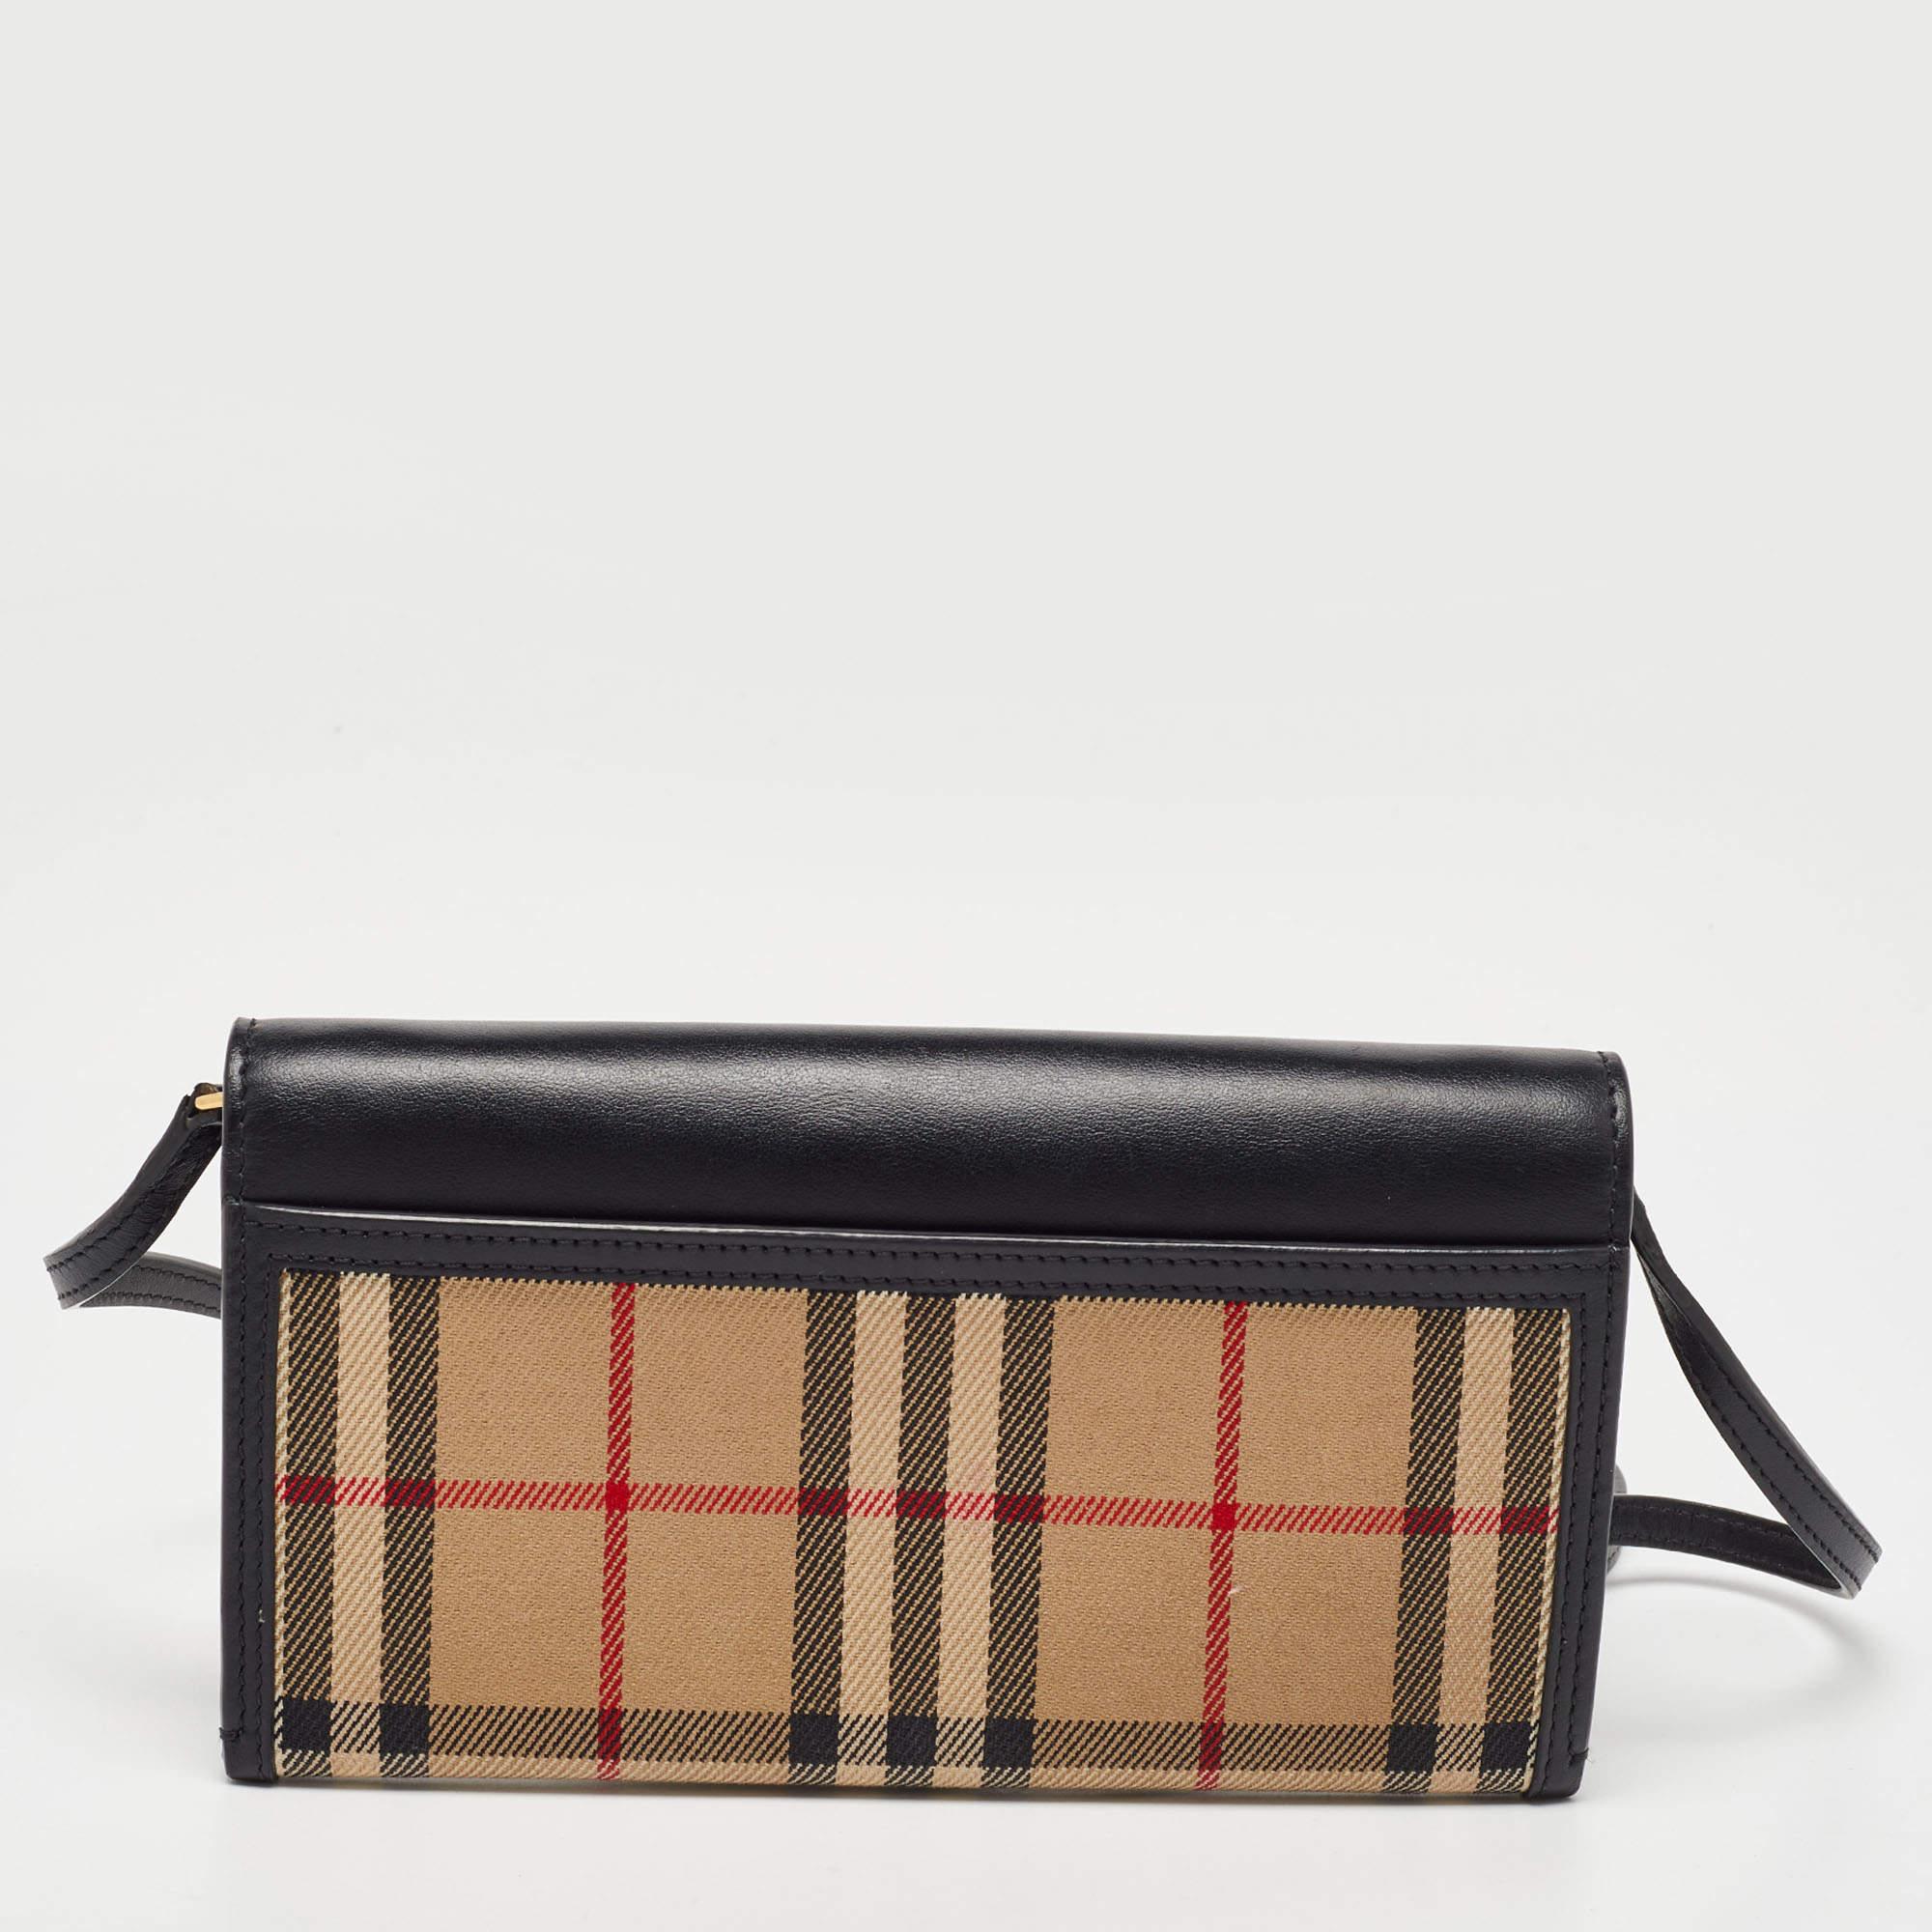 Burberry Black/Beige 1983 Knight Check Canvas and Leather Crossbody Bag 3